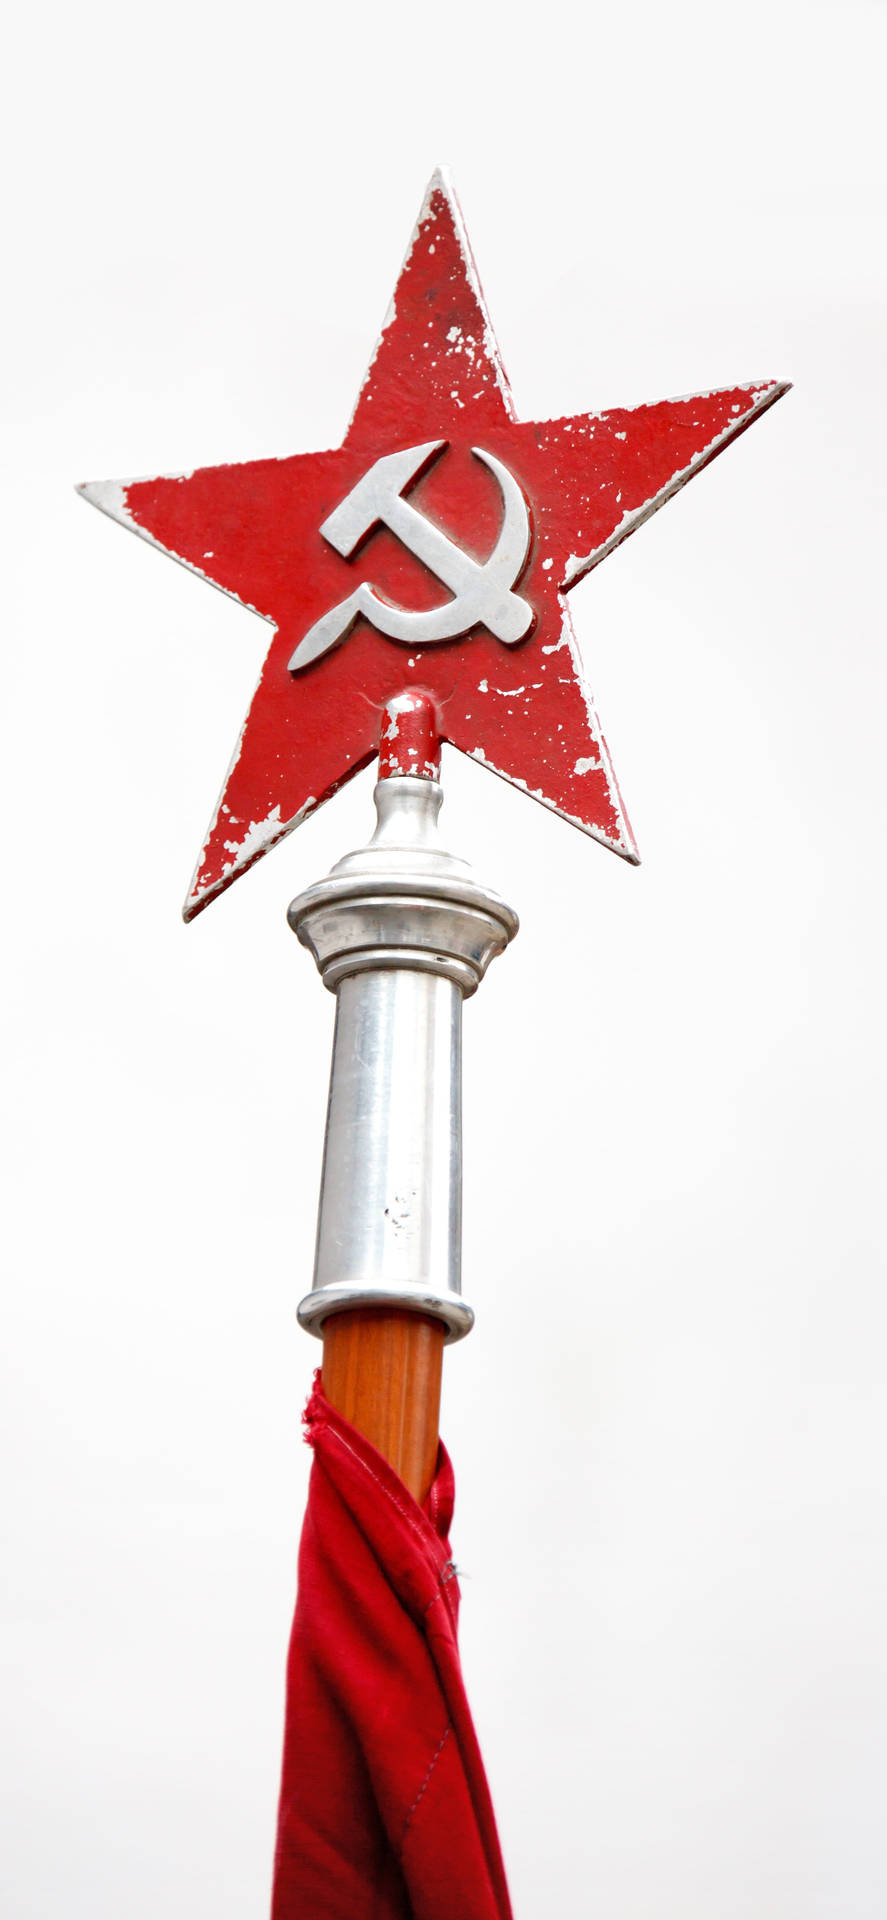 Illuminated Red Star On Tower Signage At Night Background